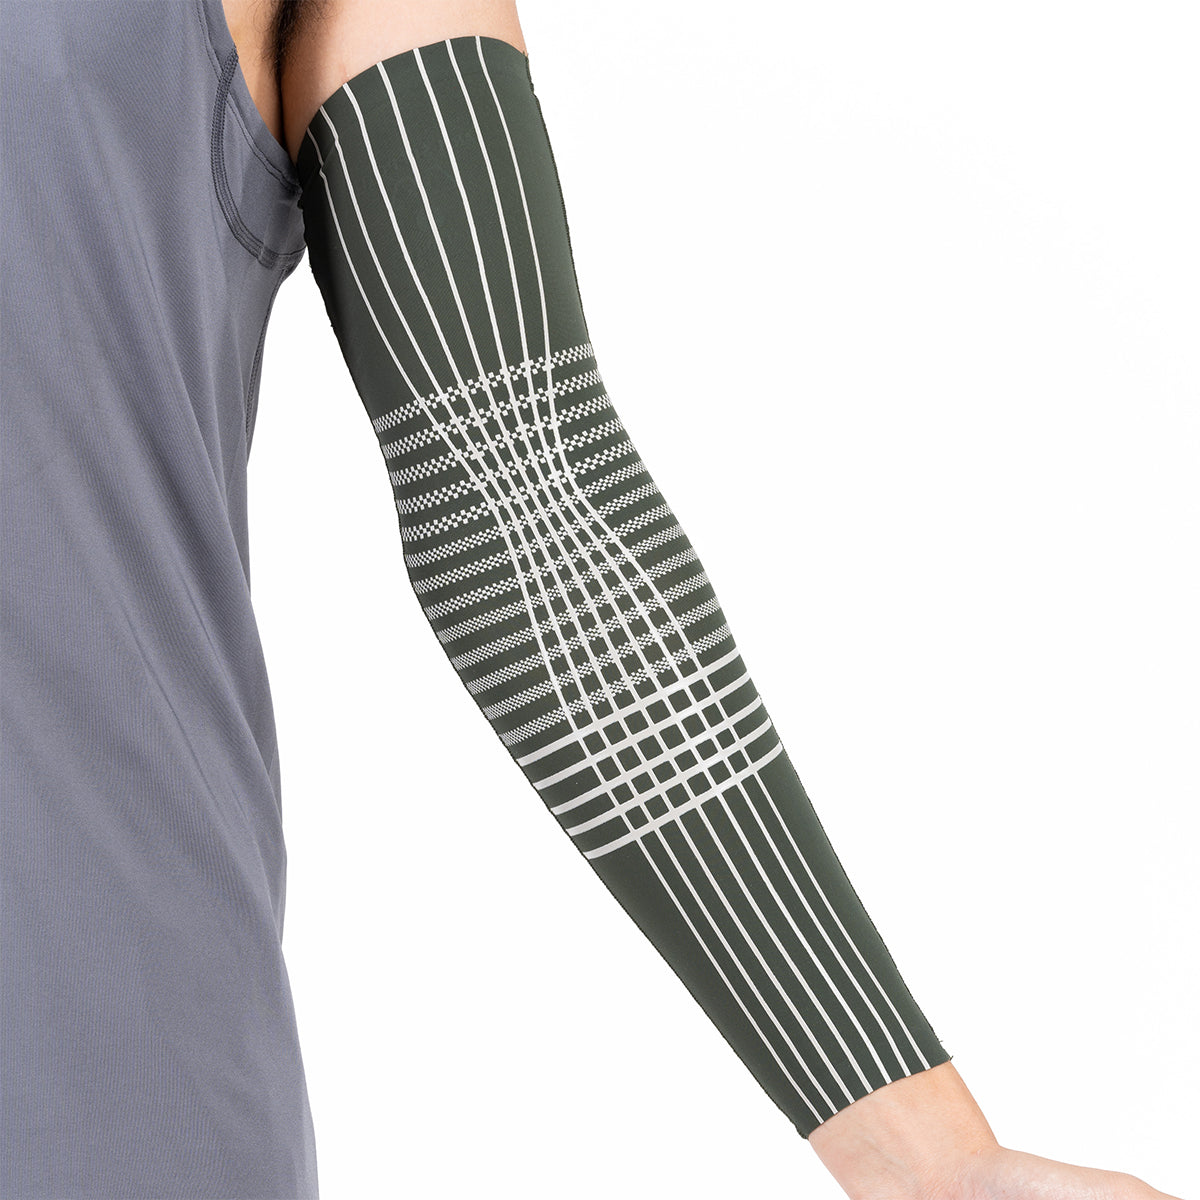 Why Train with Compression Arm Sleeves  PRO Compression –